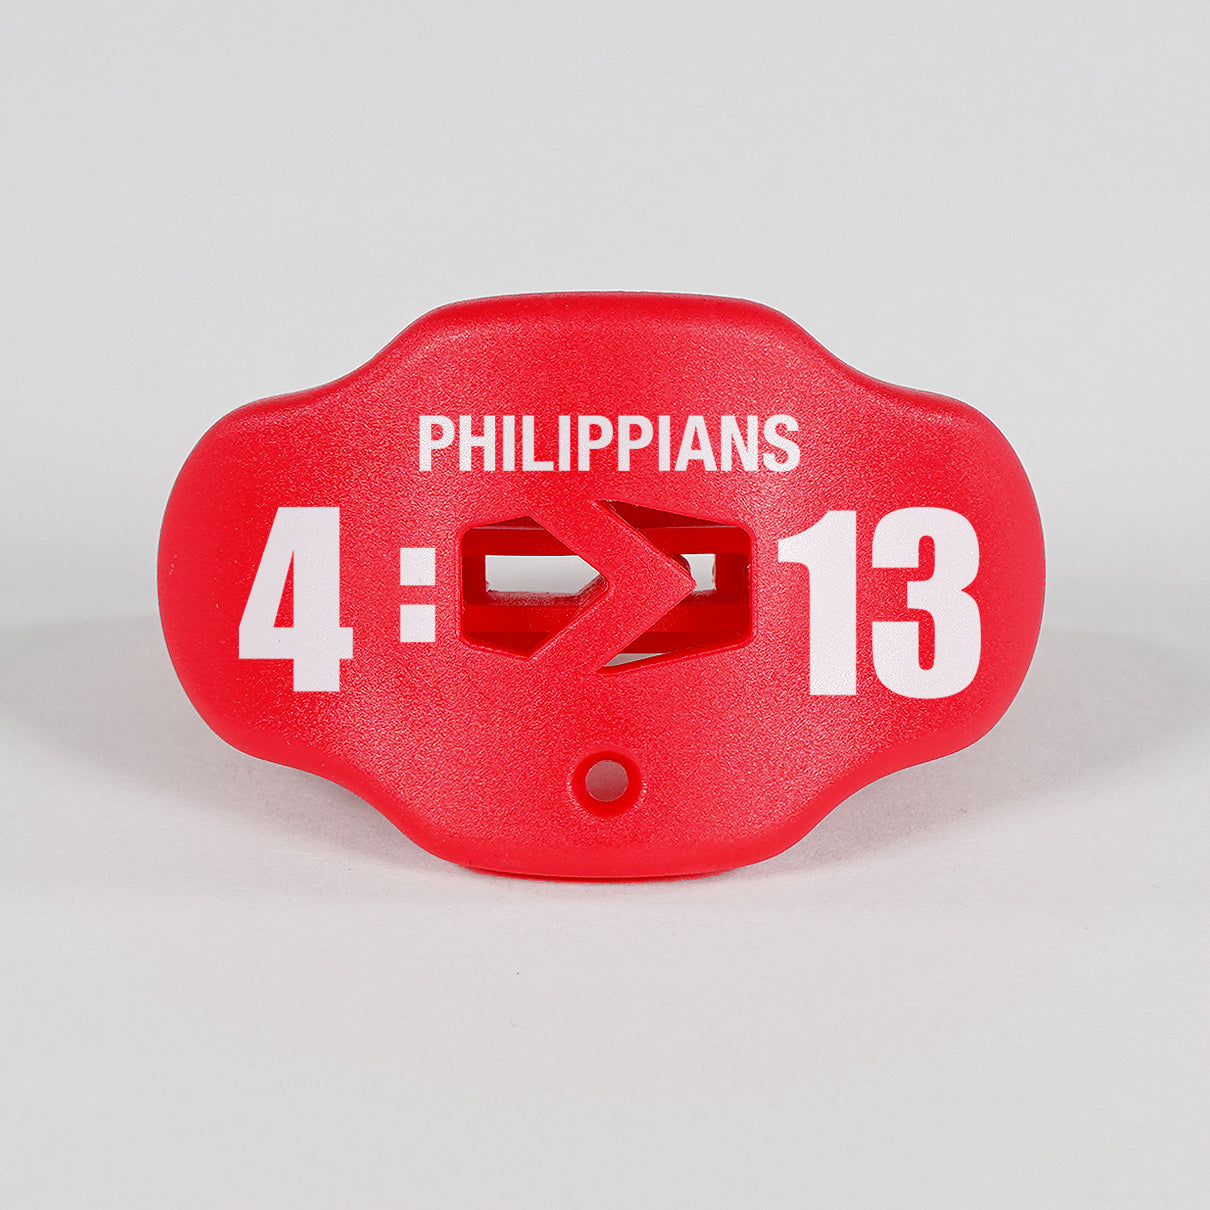 Philippians 4:13 Hue Red Football Mouthguard